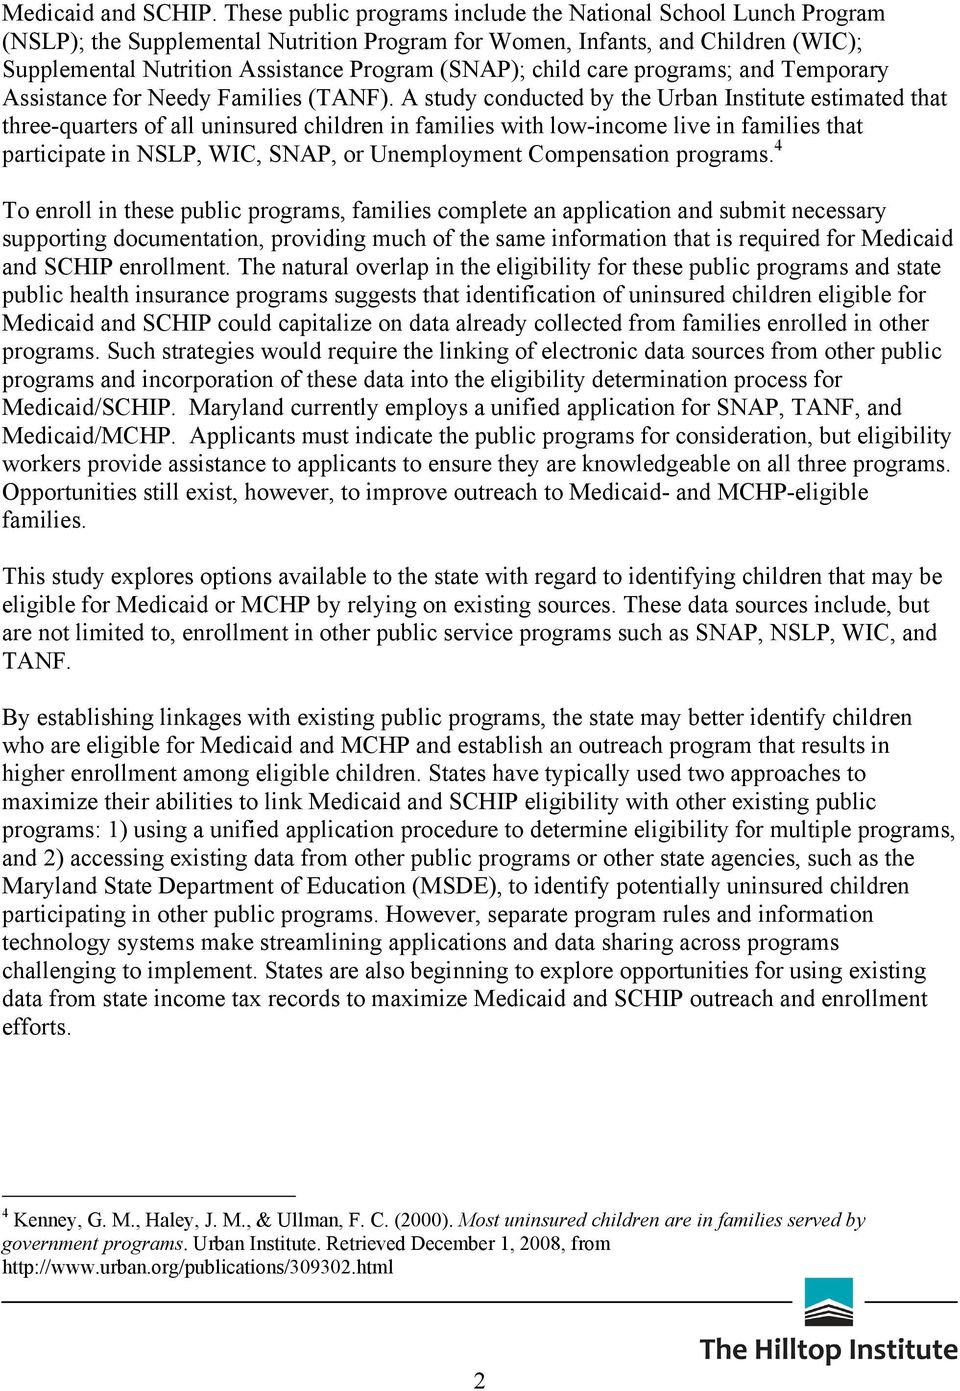 child care programs; and Temporary Assistance for Needy Families (TANF).